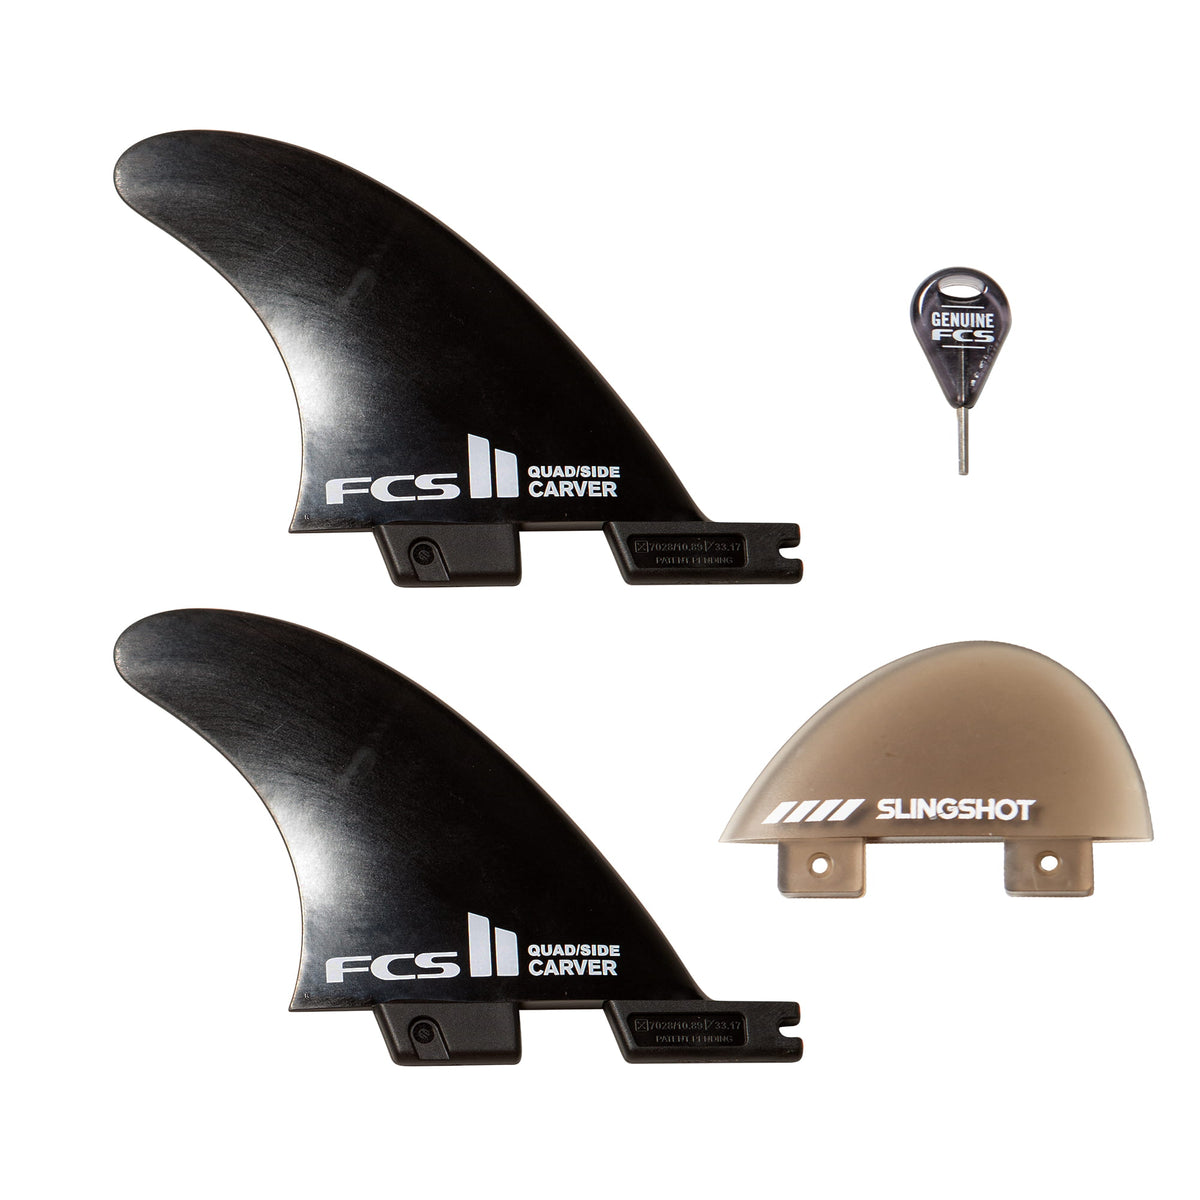 Gremlin Fin Pack (2 x FCSII Carver Quad Side Byte, small & 1 x 2